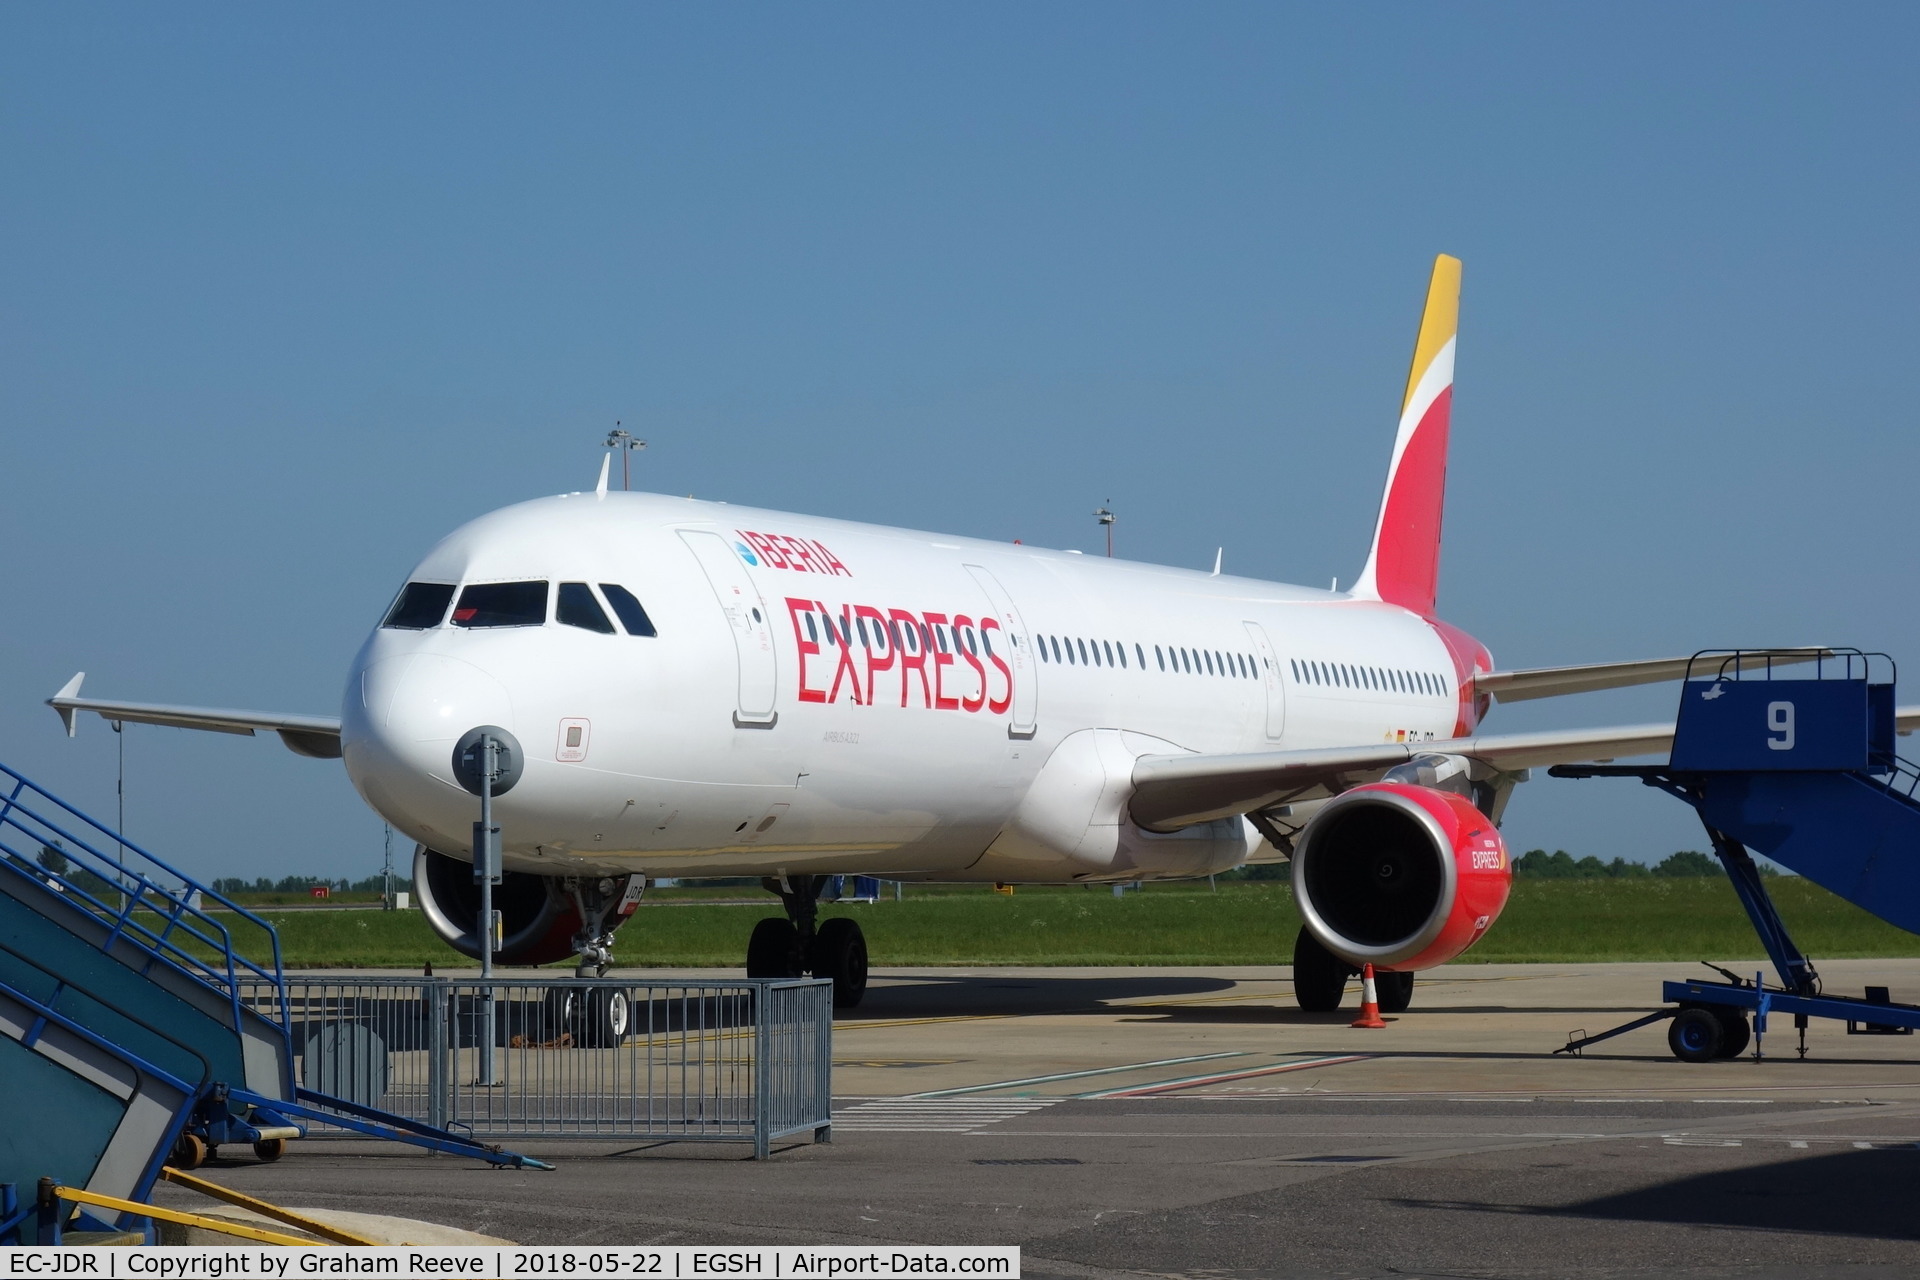 EC-JDR, 2005 Airbus A321-211 C/N 2488, Parked at Norwich, with new titles.